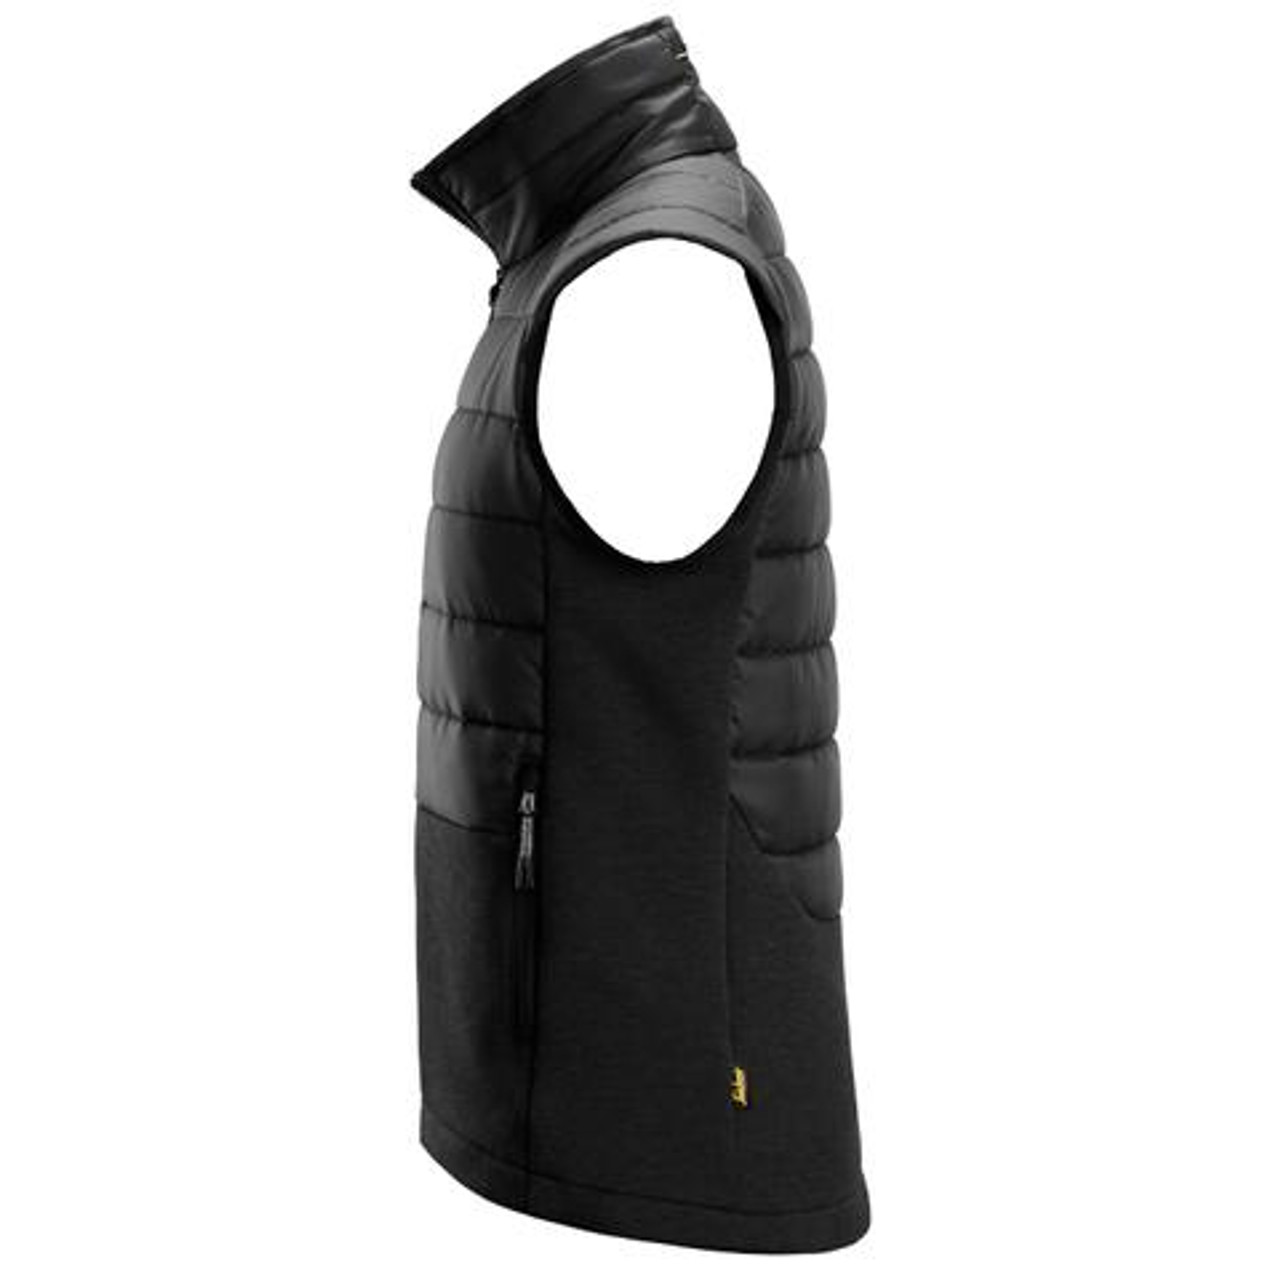 Buy online in Carpenters Vest  4902 for Boilermakers that are comfortable and durable.